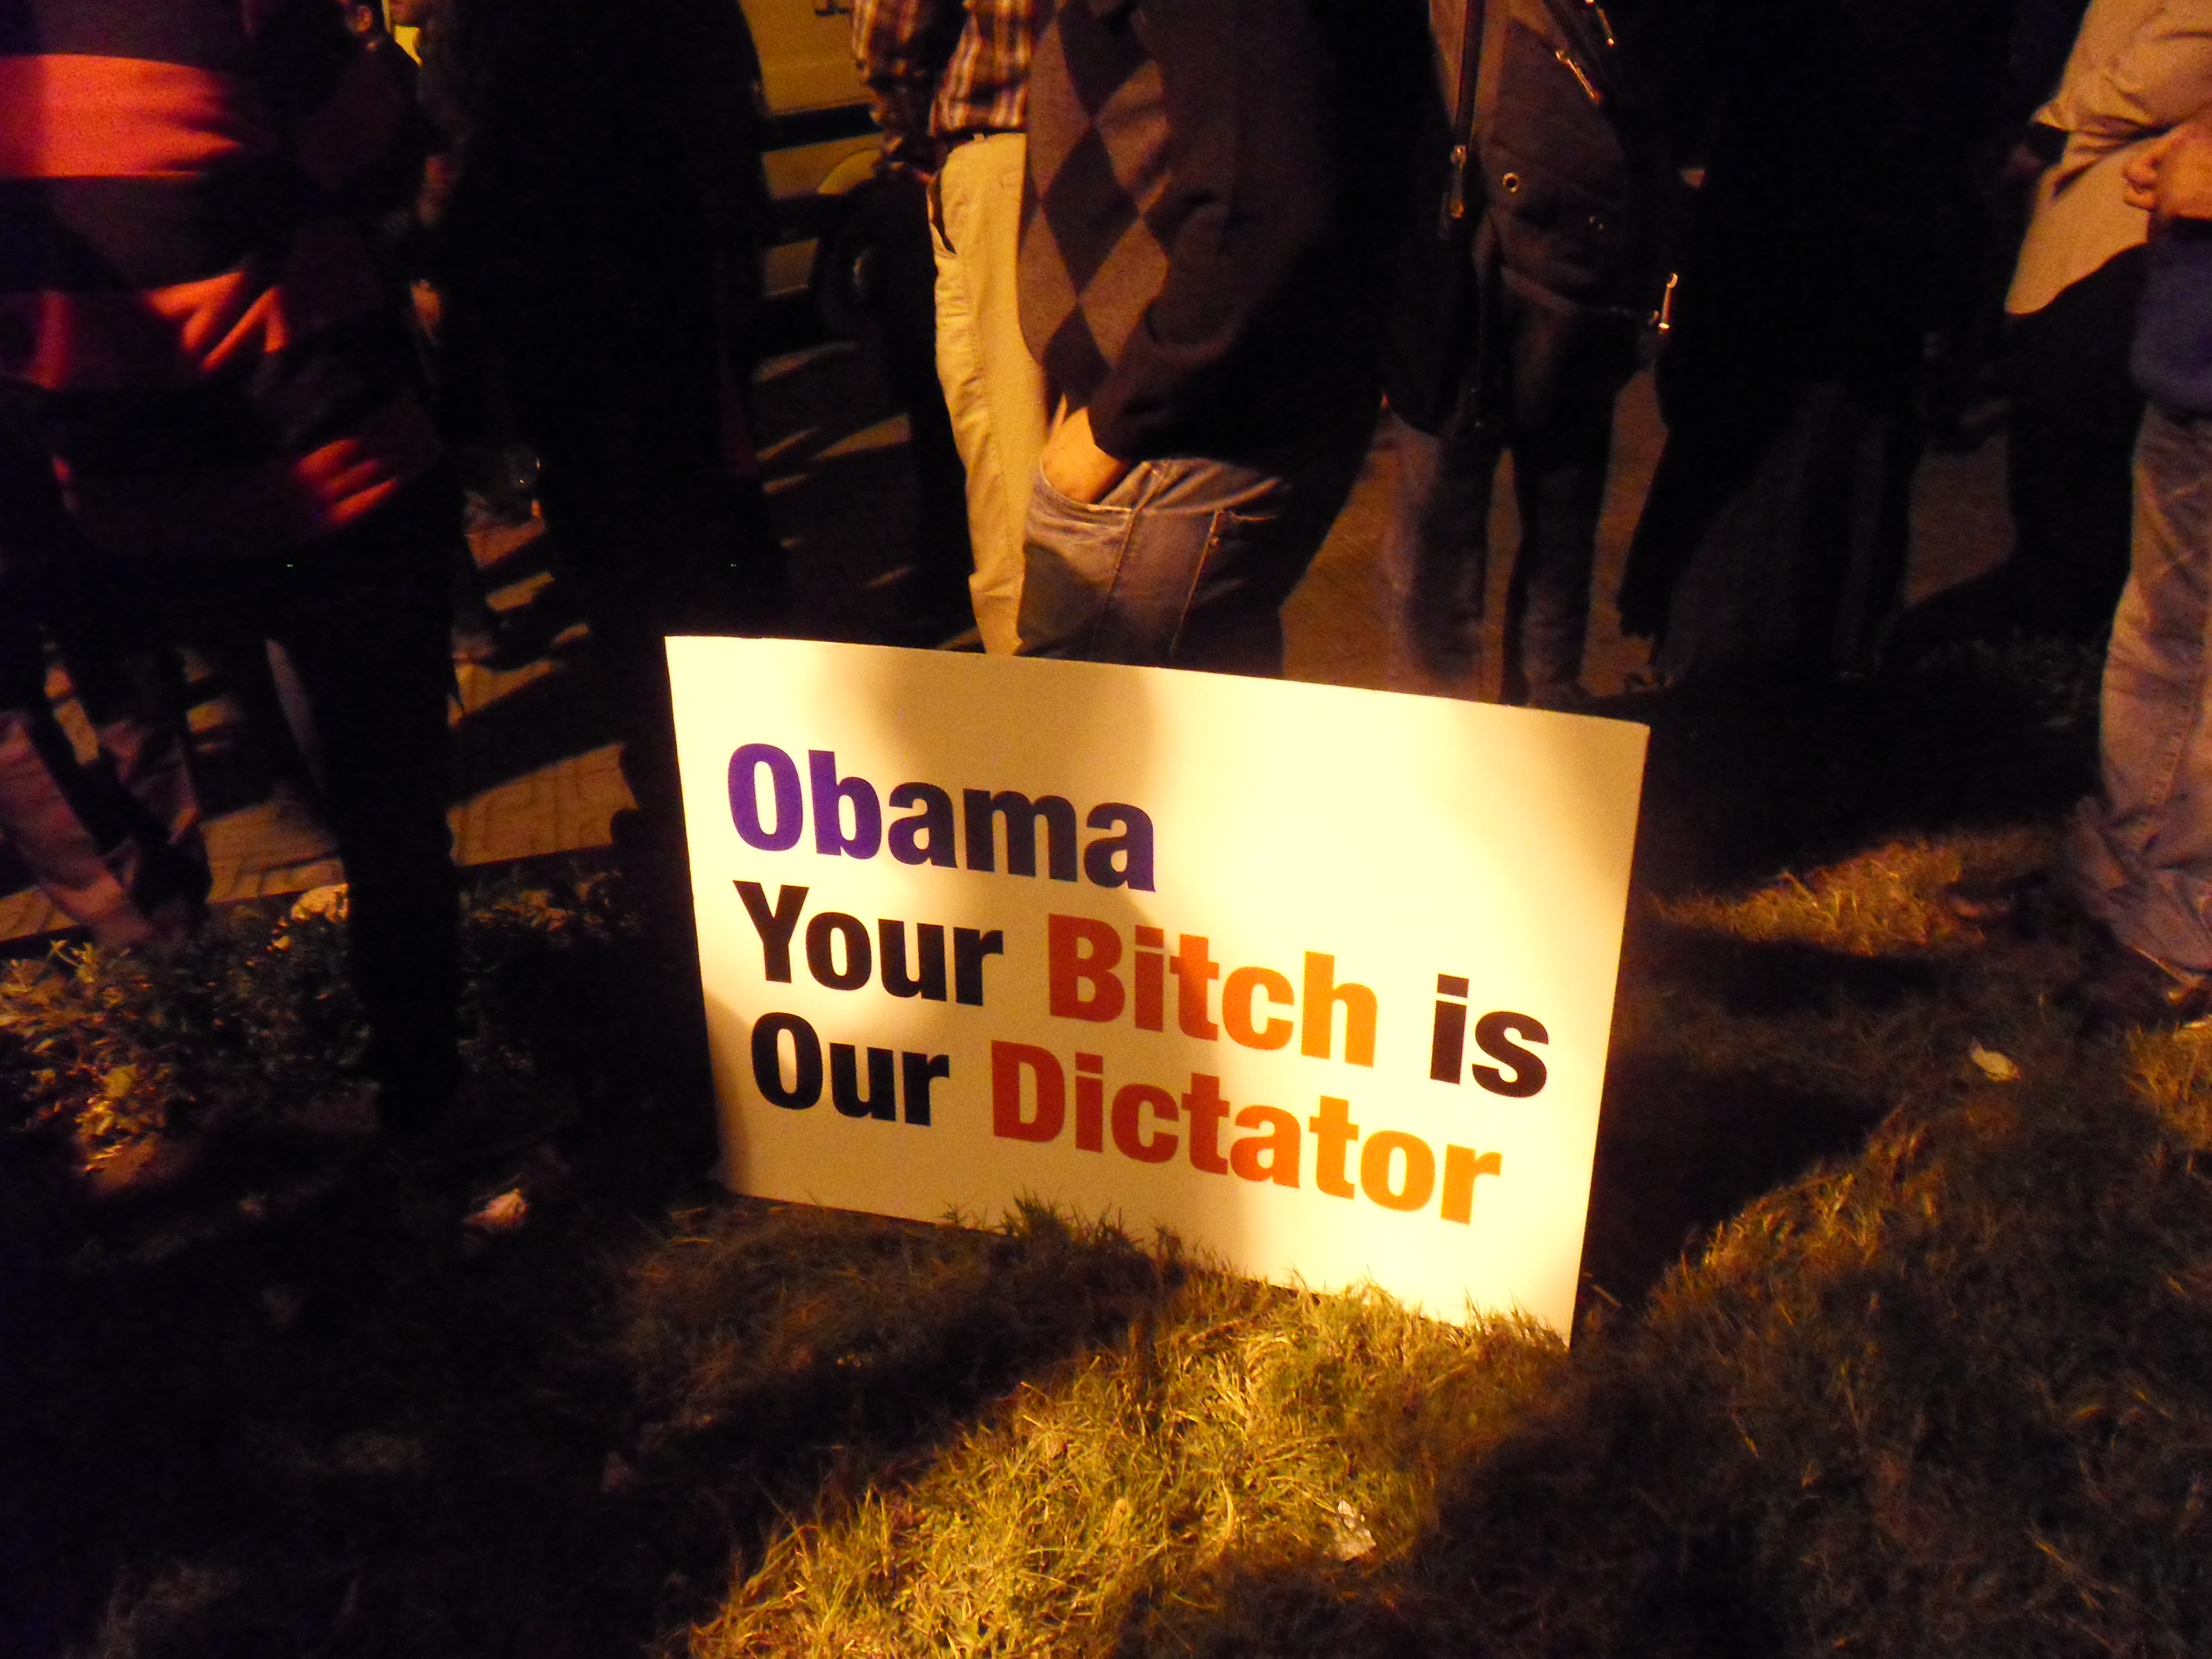 "Obama. Your Bitch is Our Dictator."